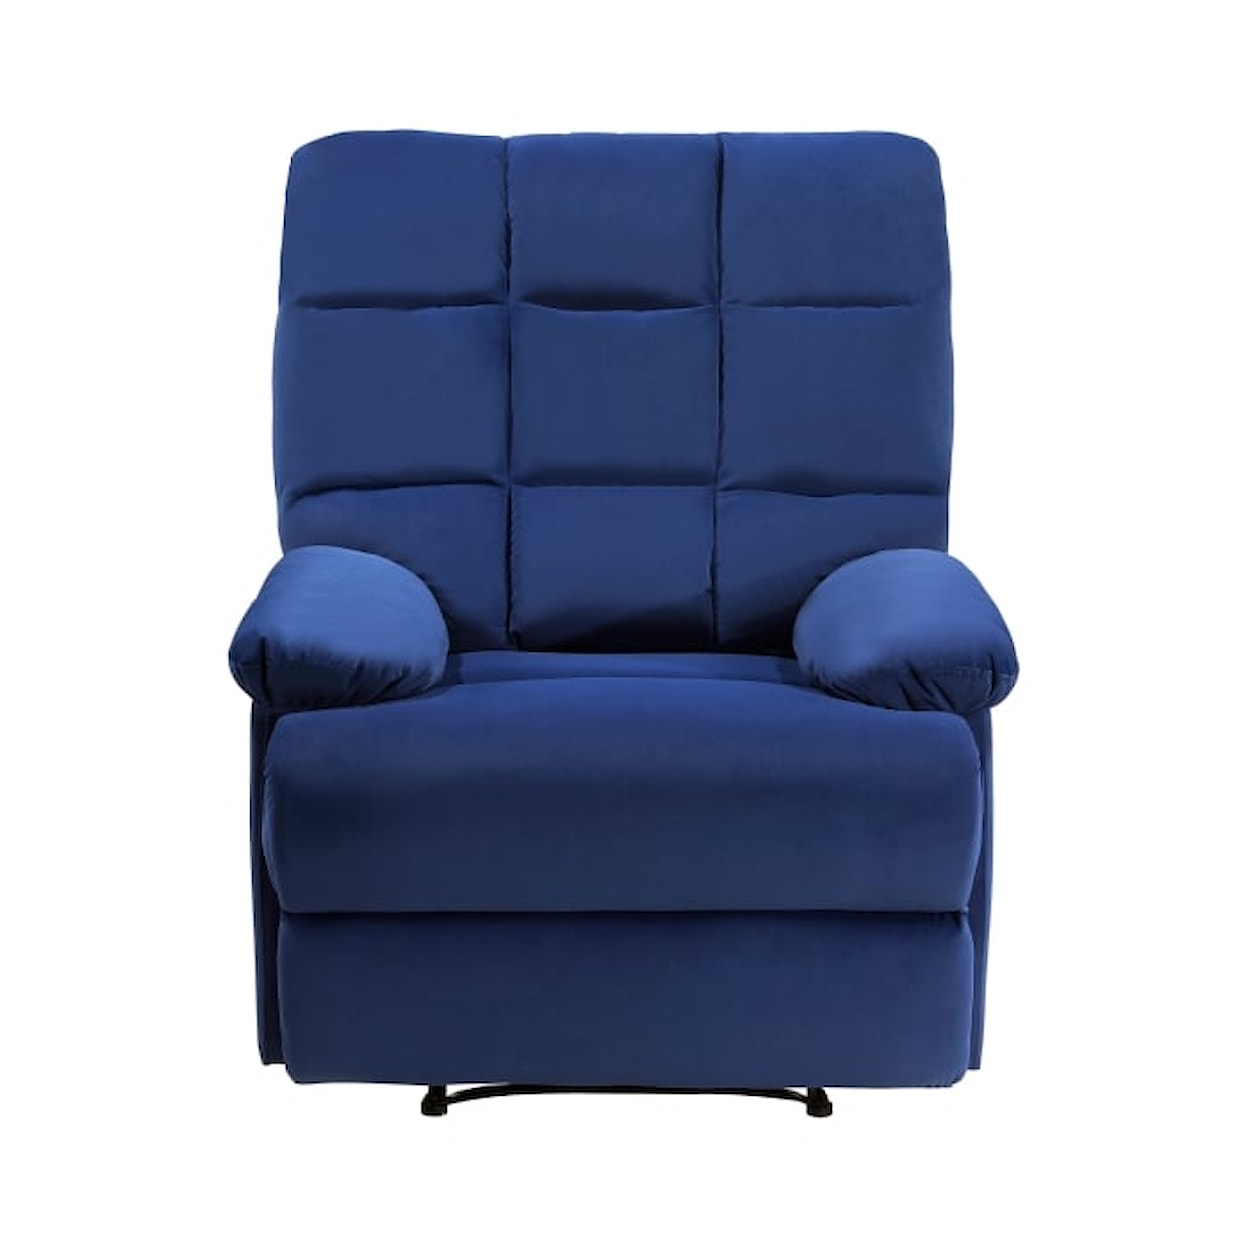 Homelegance Furniture Colin Reclining Chair